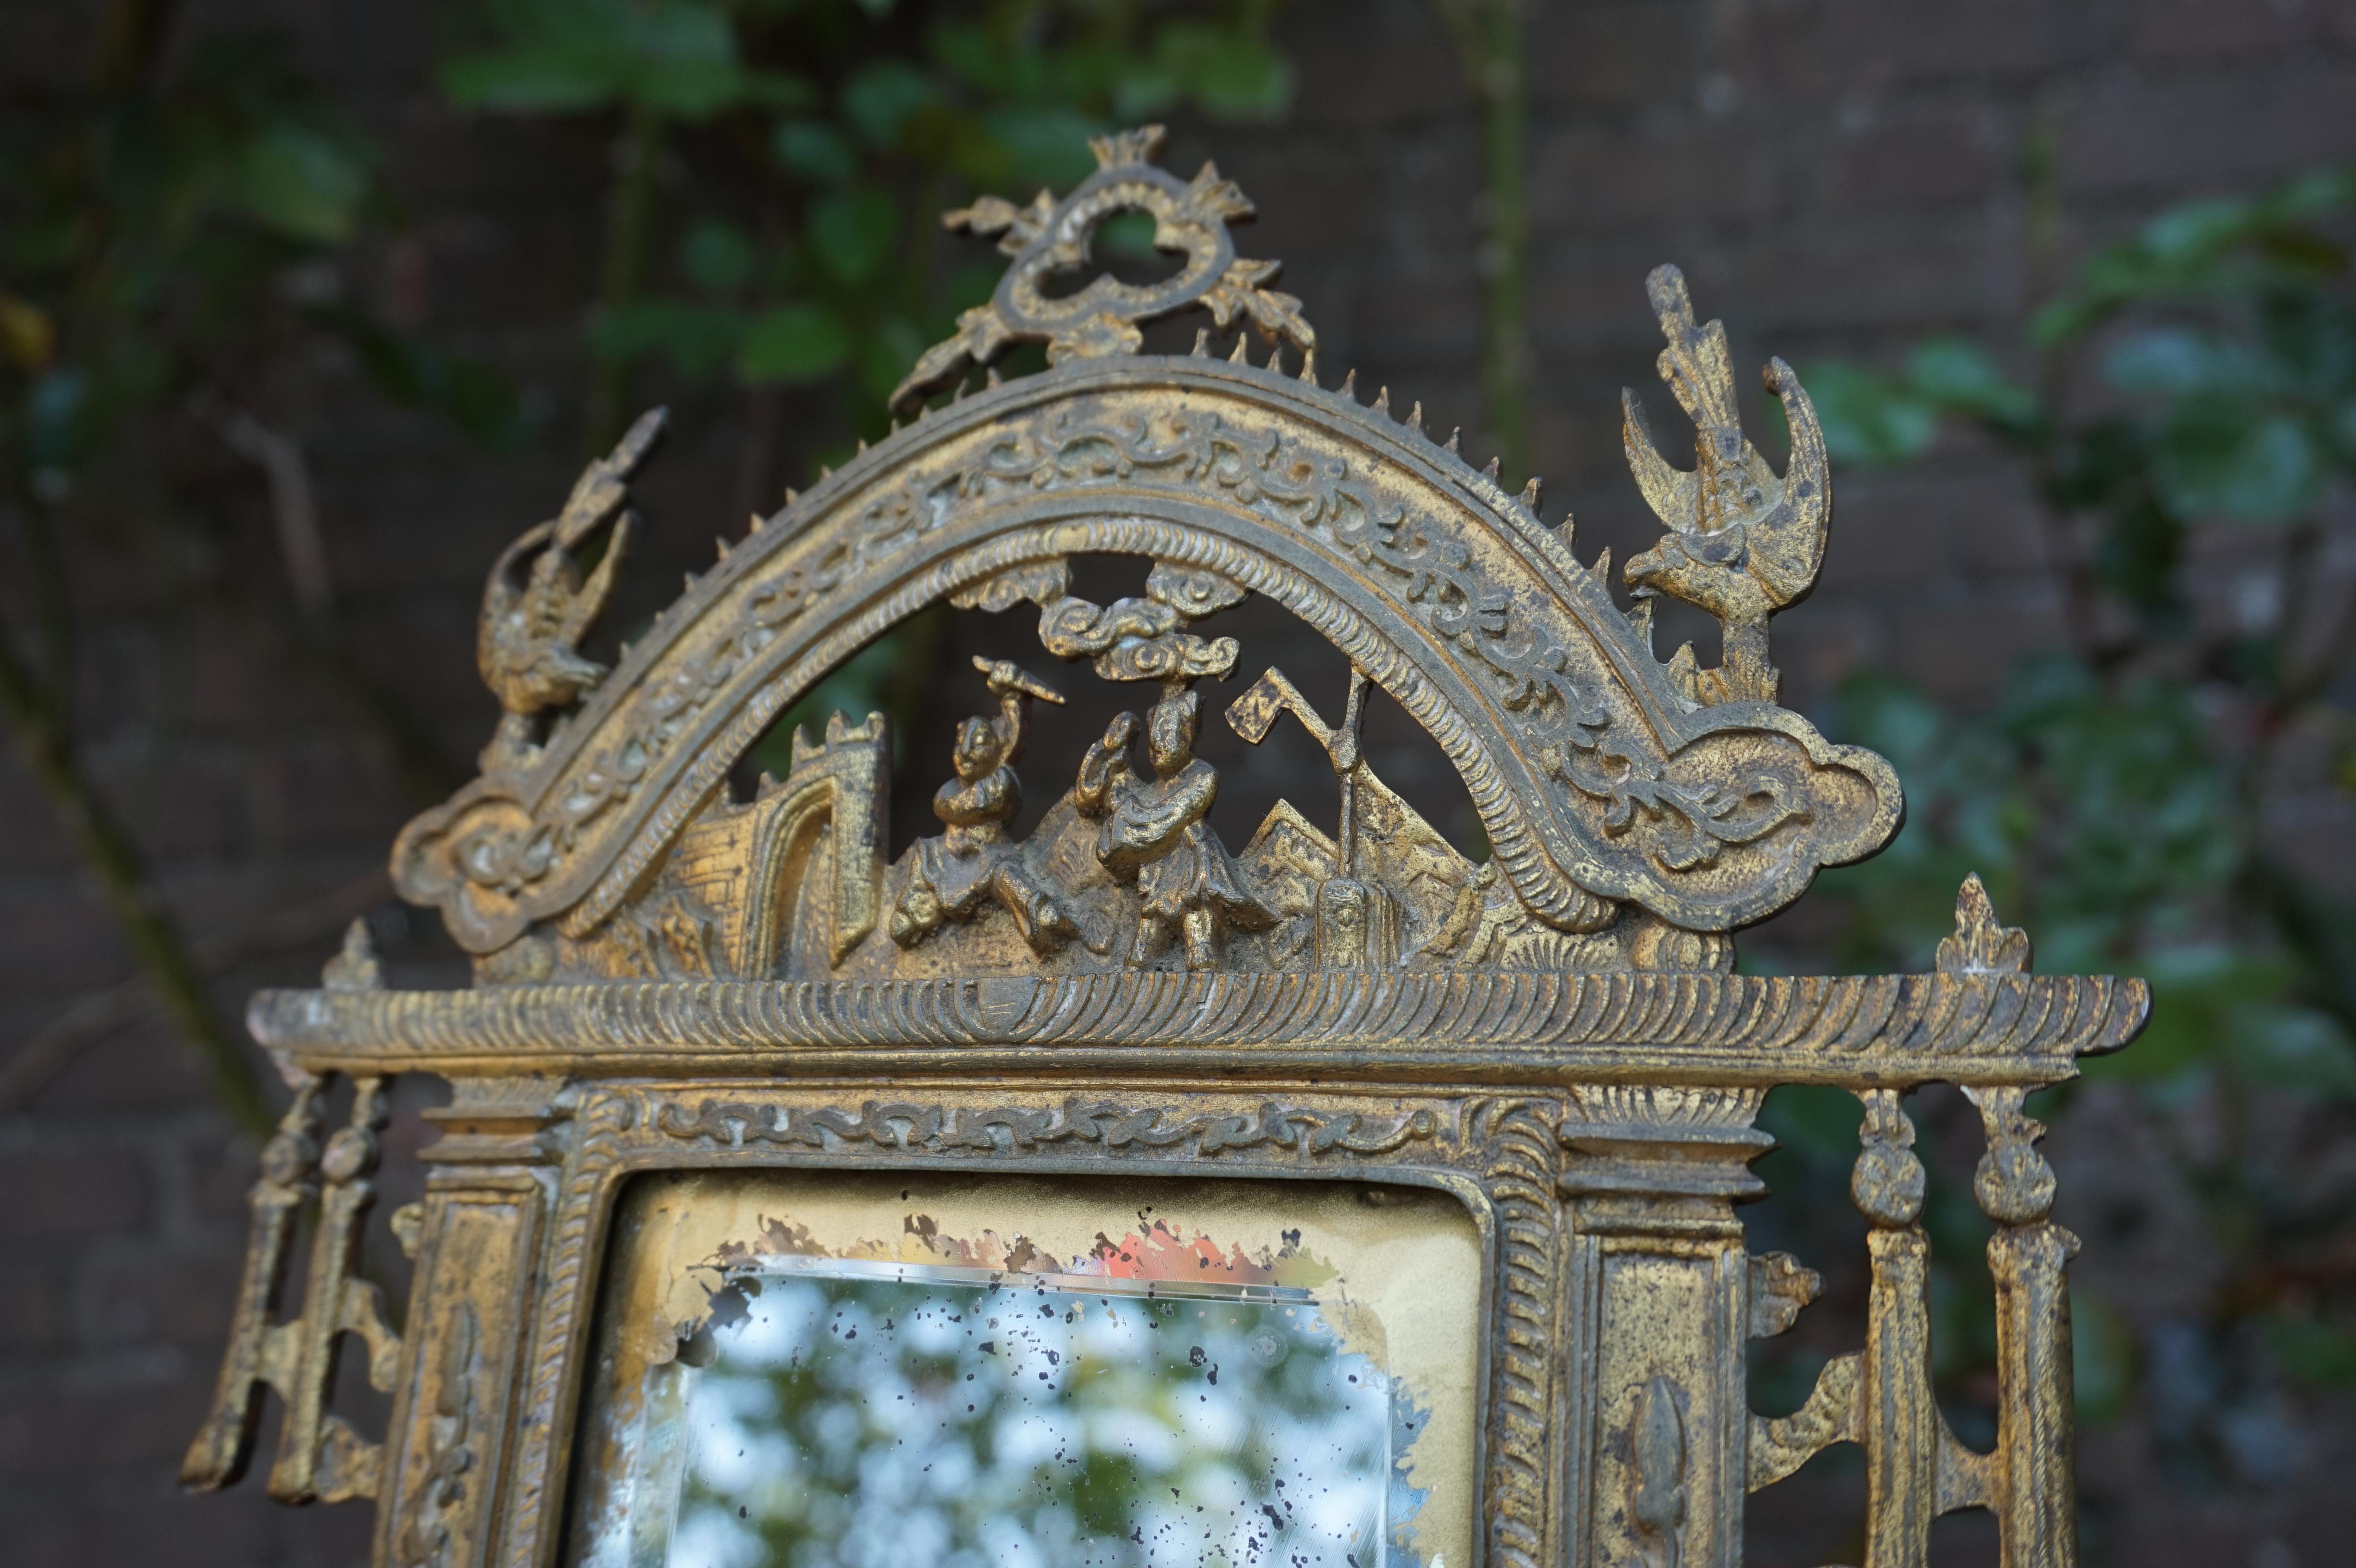 Late 19th or Early 20th Century Chinese or Chinoiserie Gilt Ormolu Table Mirror For Sale 4